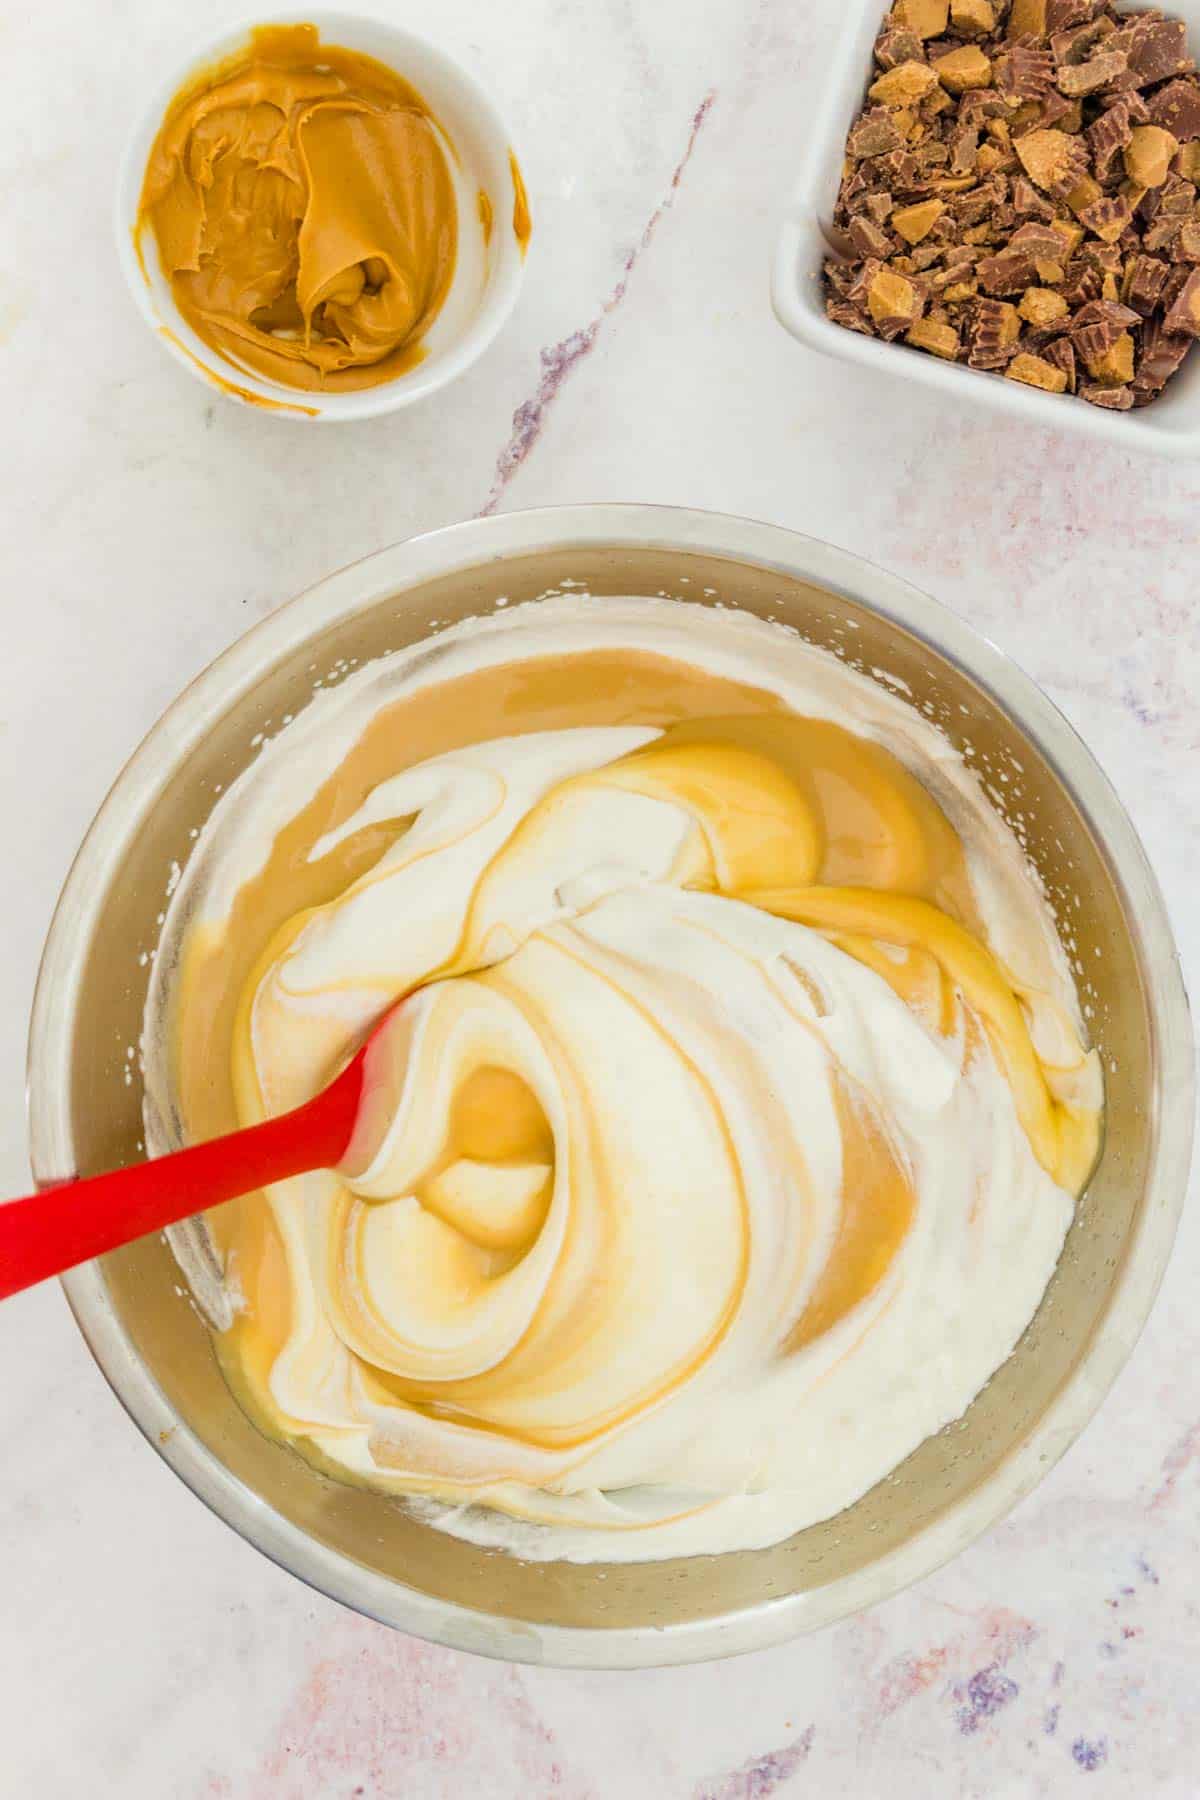 The sweetened condensed milk mixture is stirred into the whipped cream for the Reese's ice cream base.